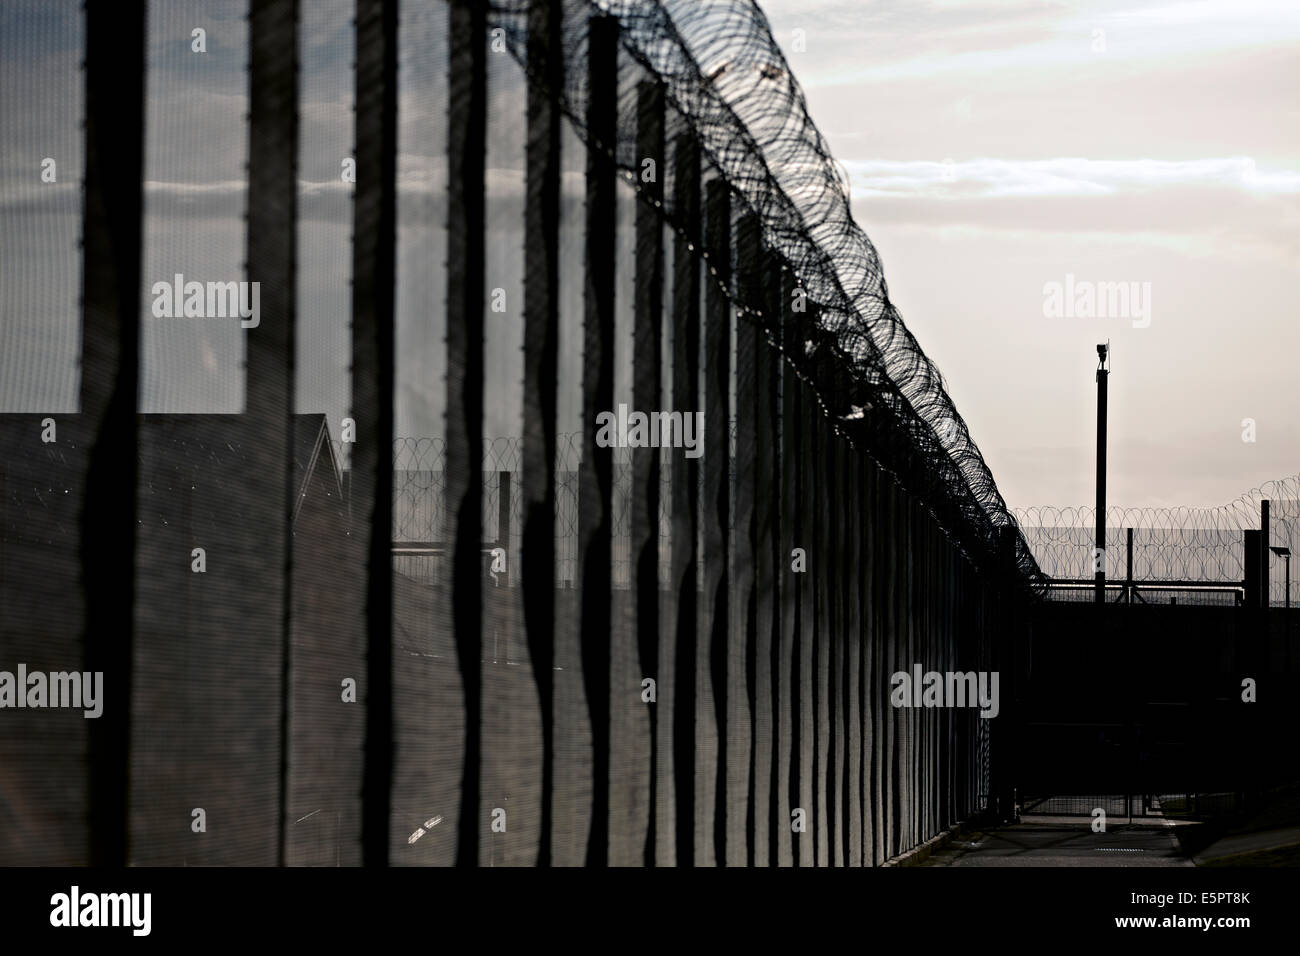 Security fencing, razor wire and CCTV cameras around the perimeter of a UK prison. Stock Photo